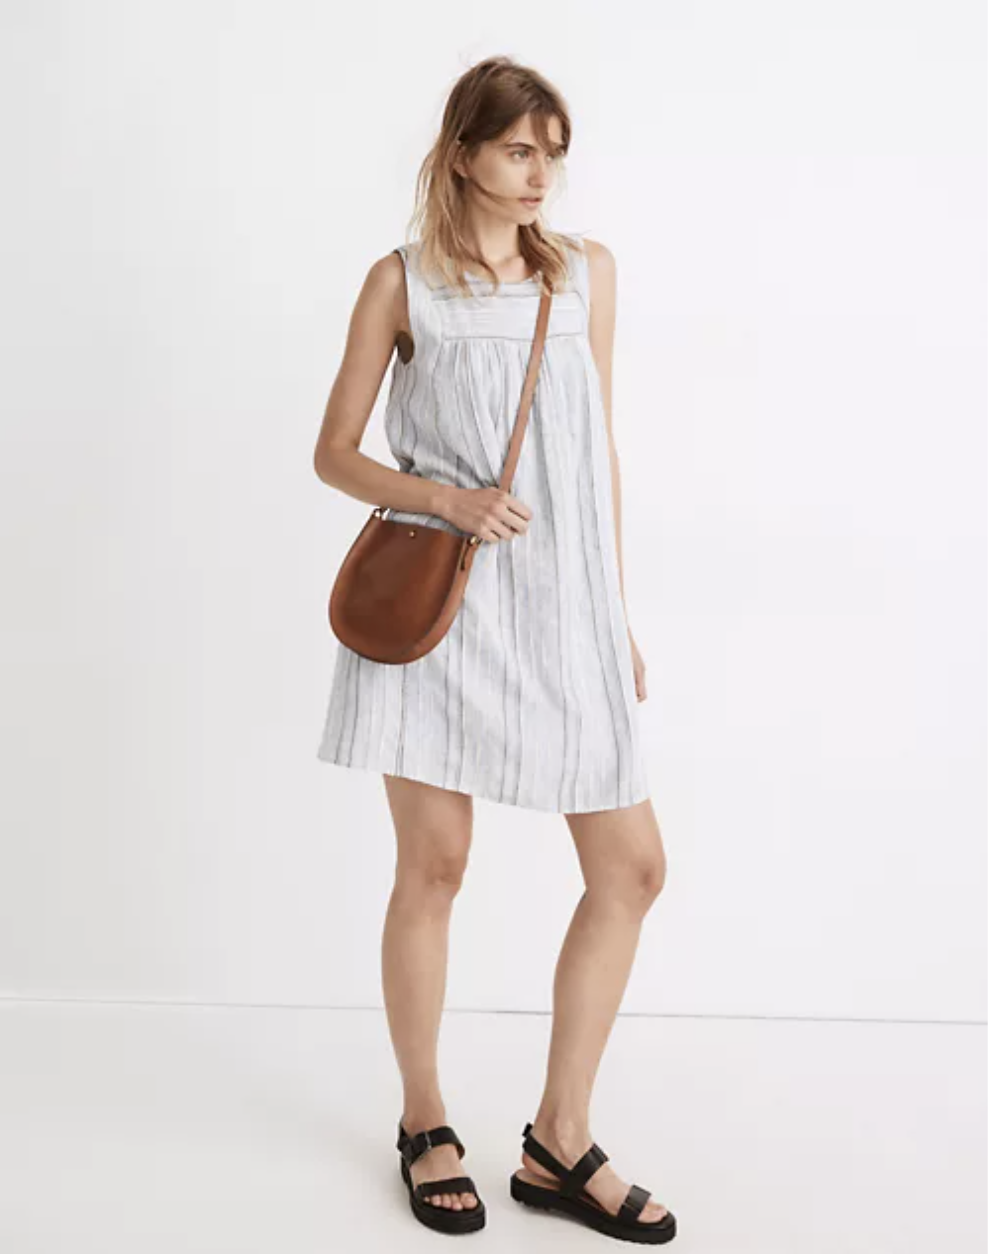 Model in a blue and white striped dress with a square cut collar